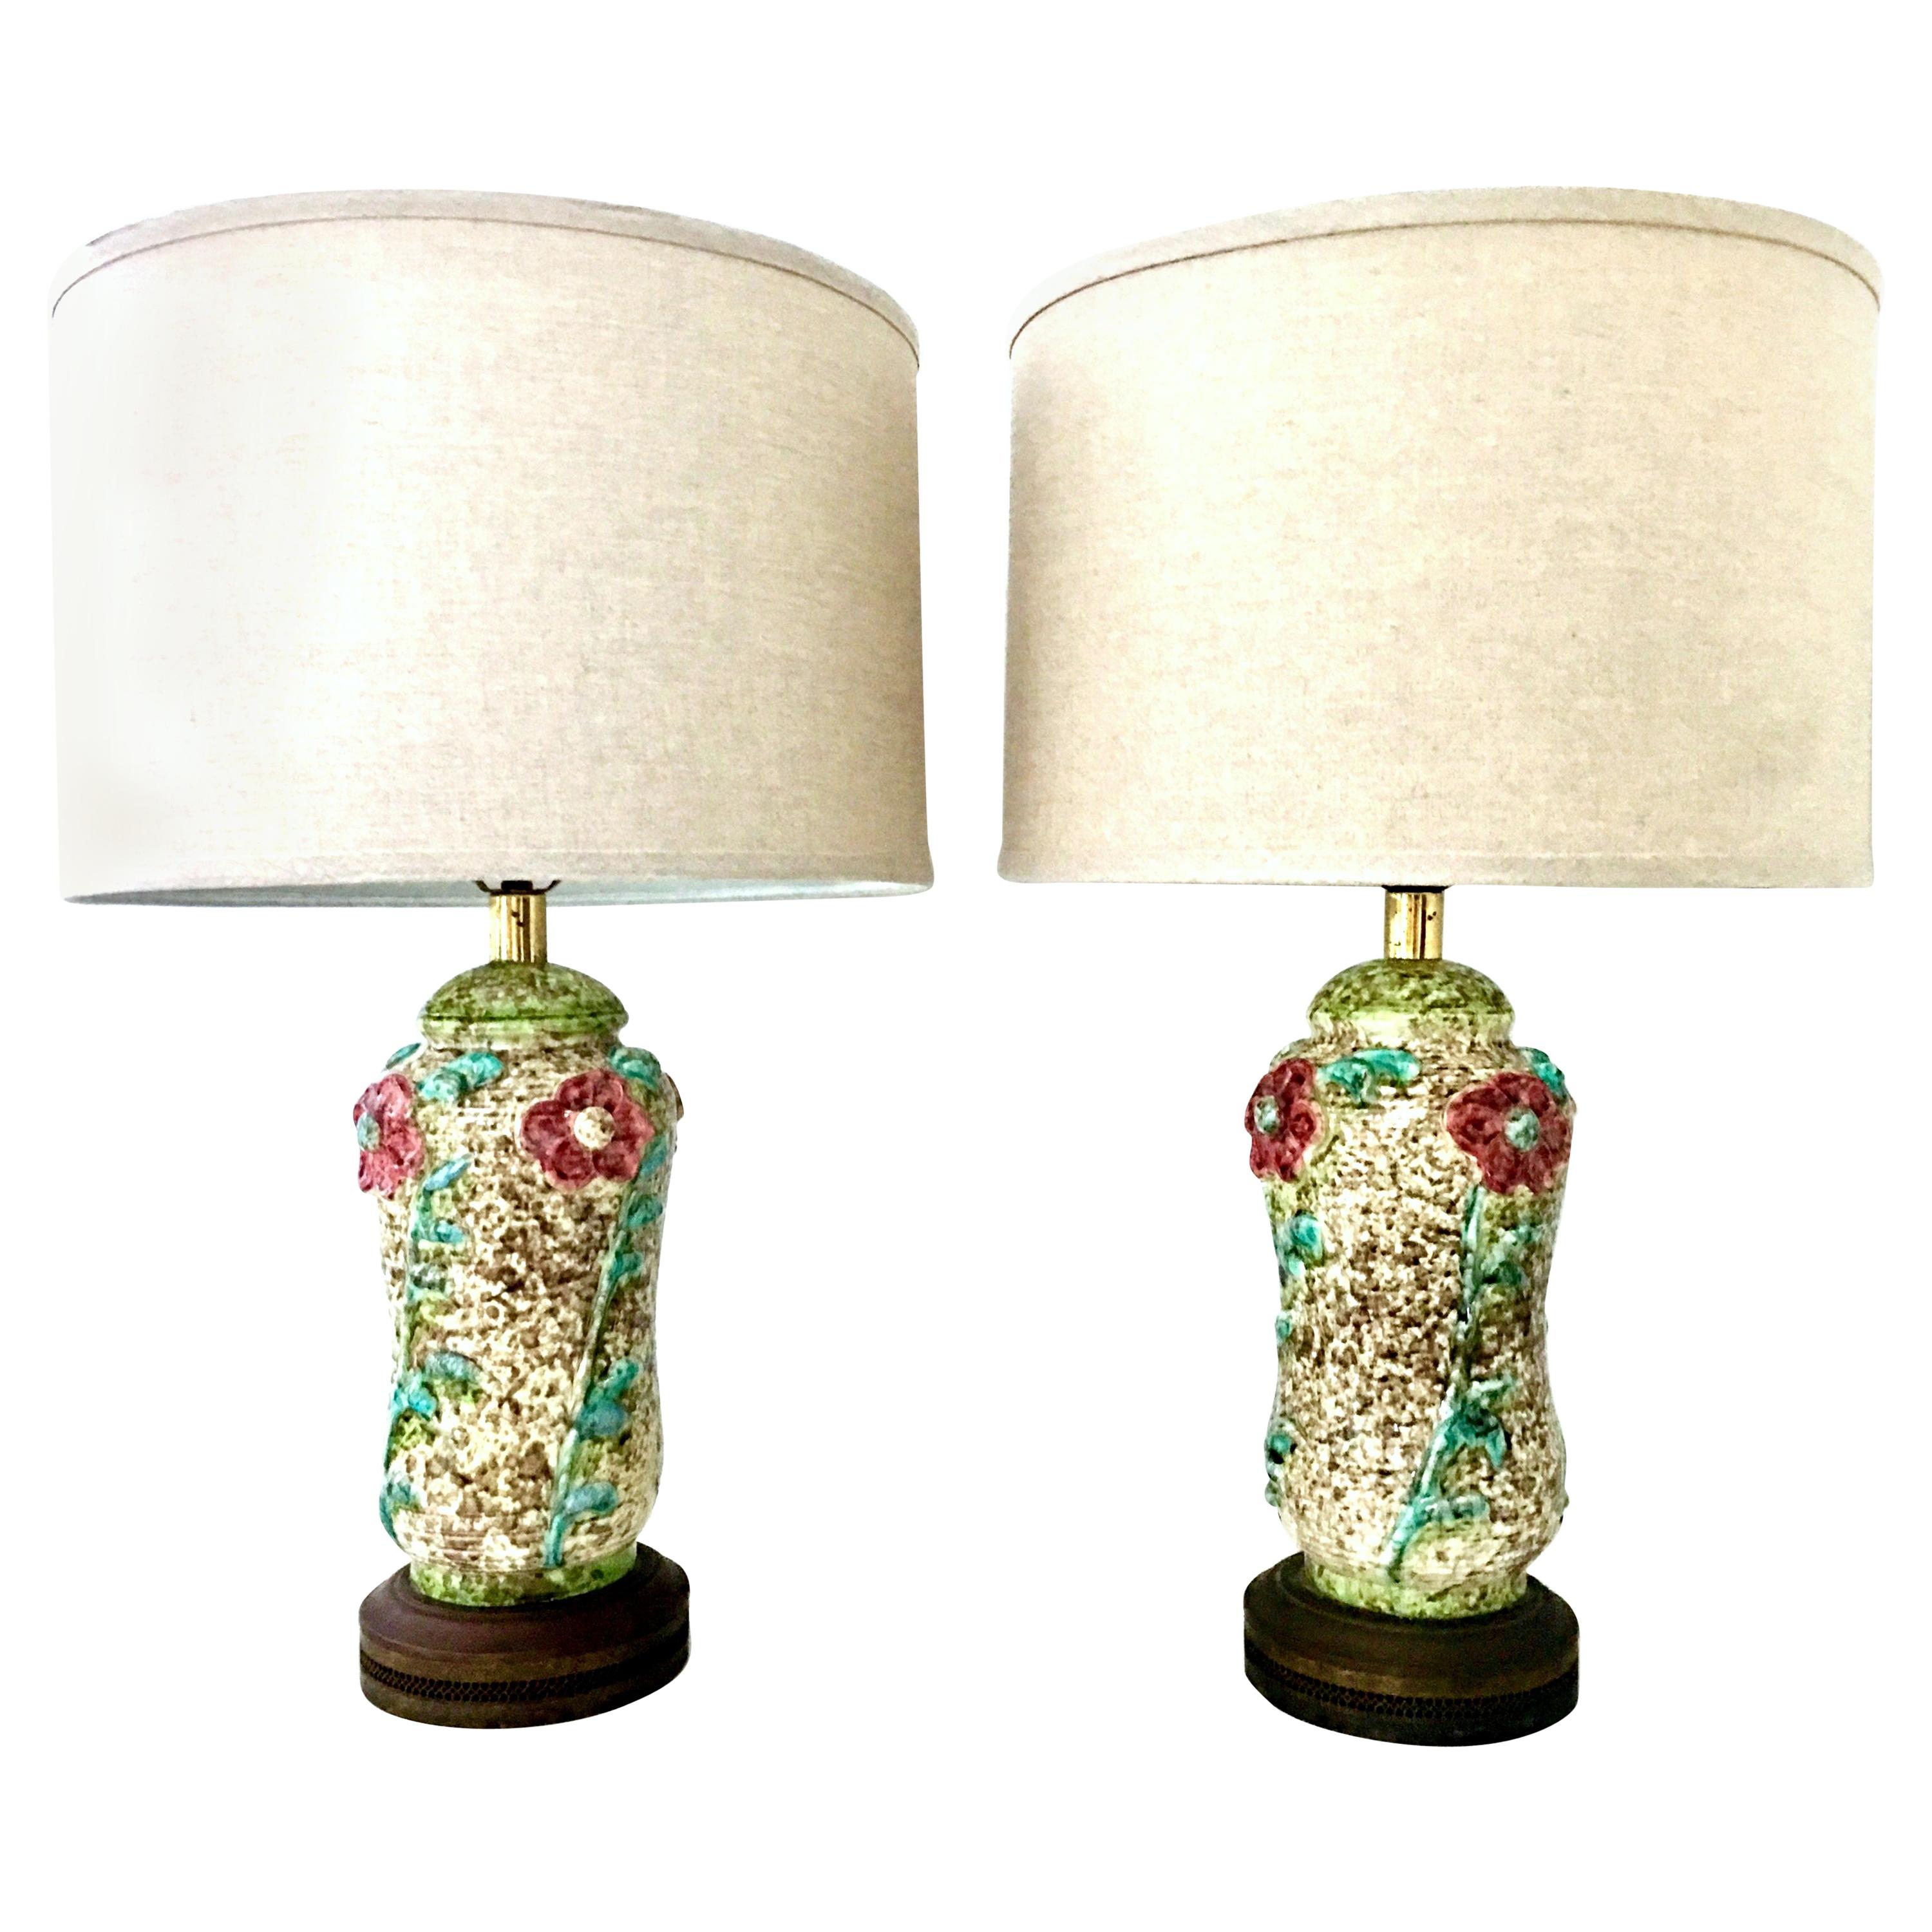 Mid-20th Century Pair of Ceramic Glaze and Gilt Brass Floral Table Lamps For Sale